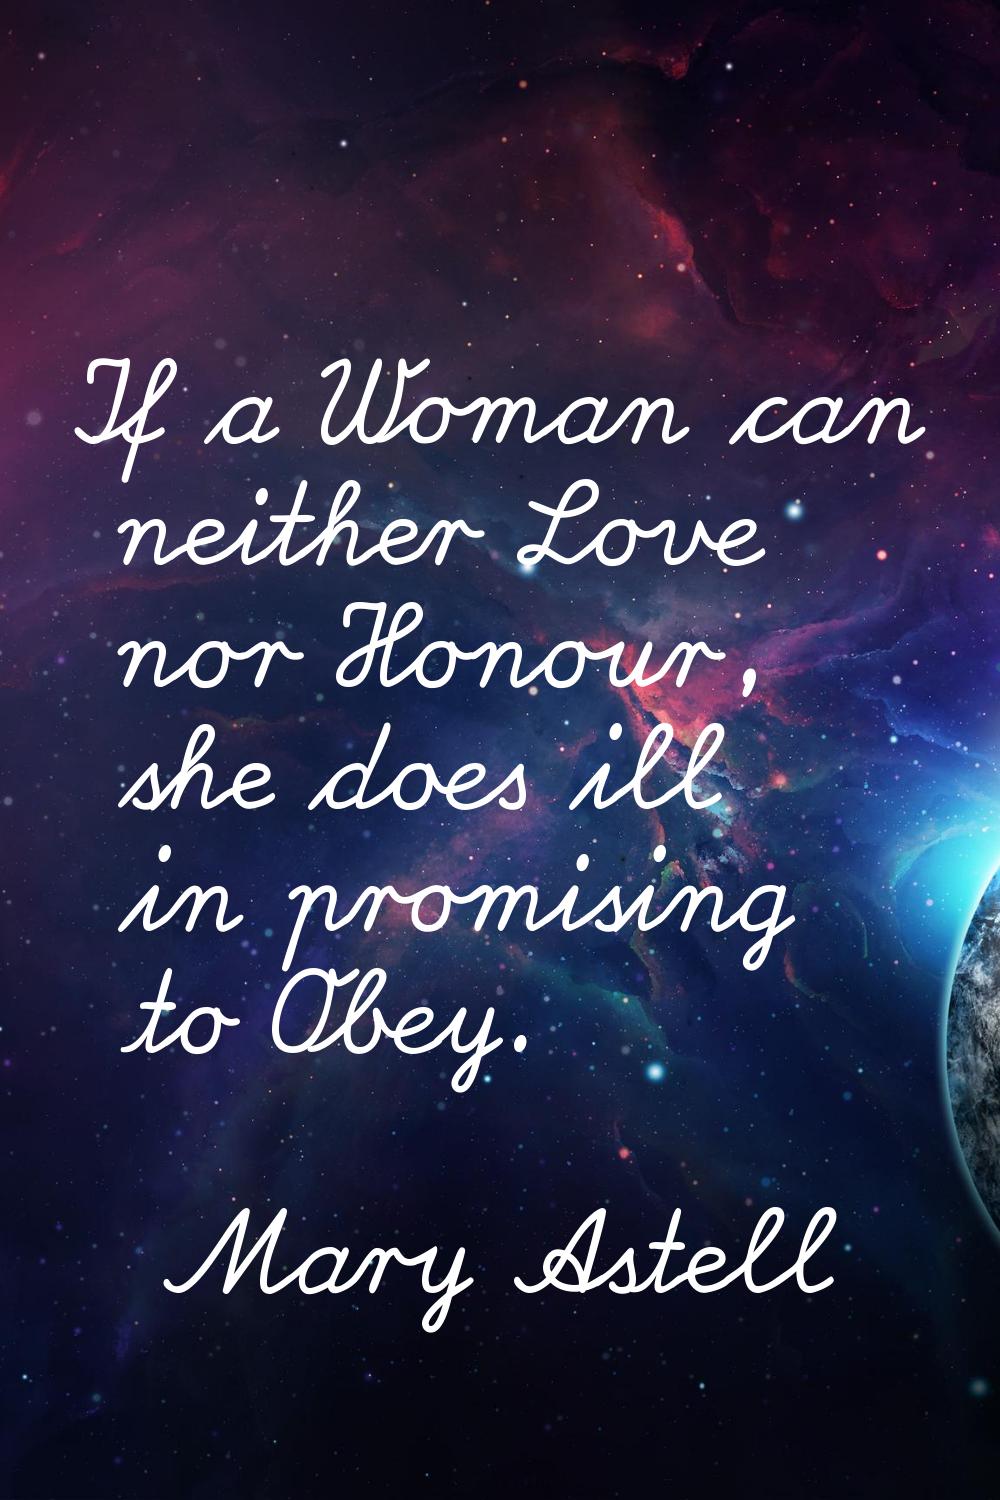 If a Woman can neither Love nor Honour, she does ill in promising to Obey.